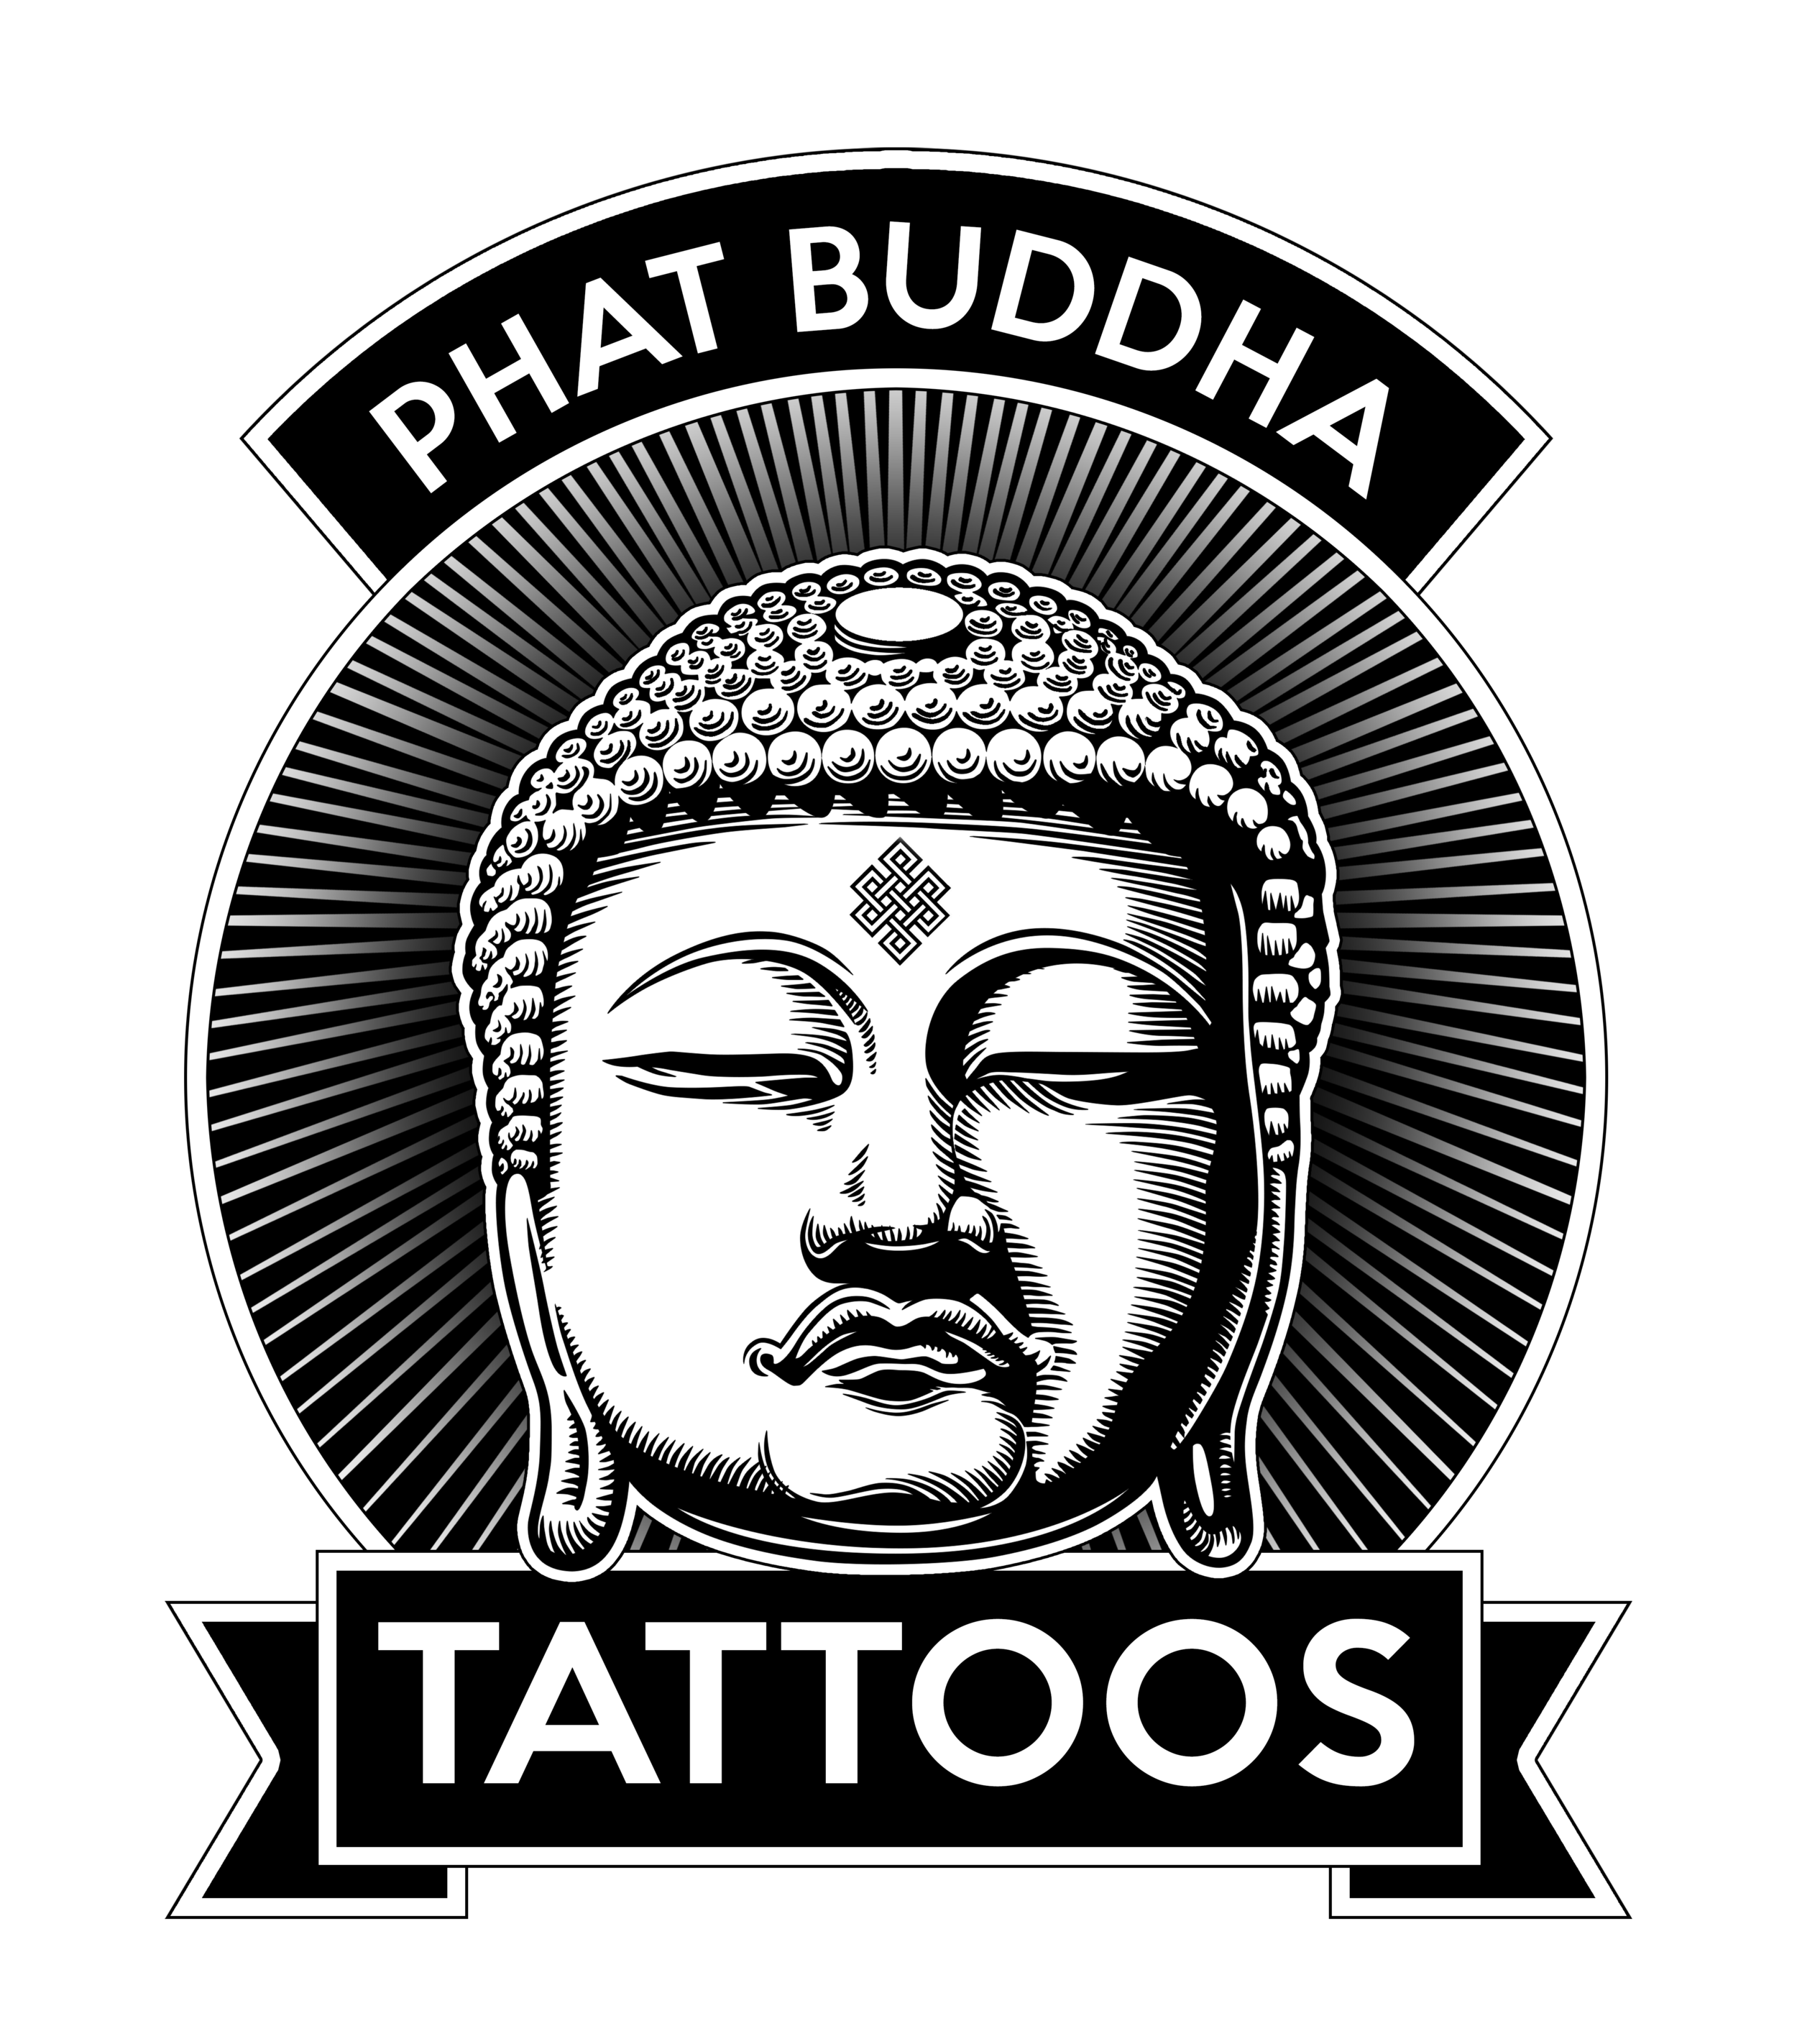 Download The Time Has Come For A Top Shelf Greywash Tattoo Series  Black Buddha  Tattoo Ink PNG Image with No Background  PNGkeycom